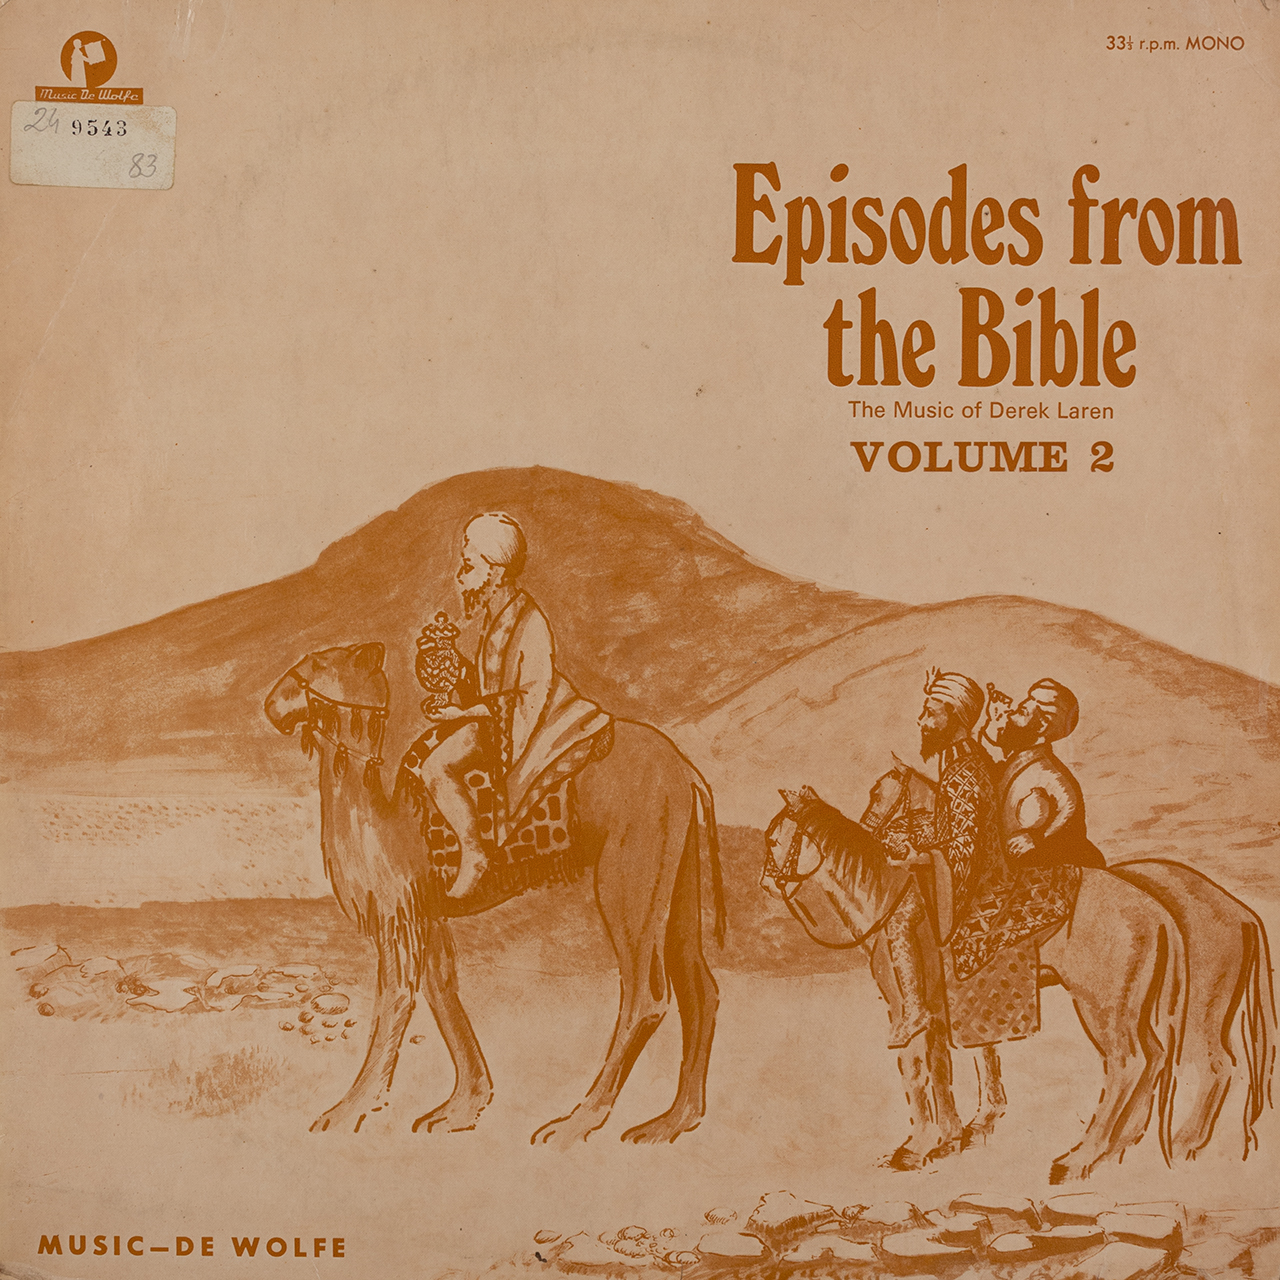 Episodes from the Bible Volume 2